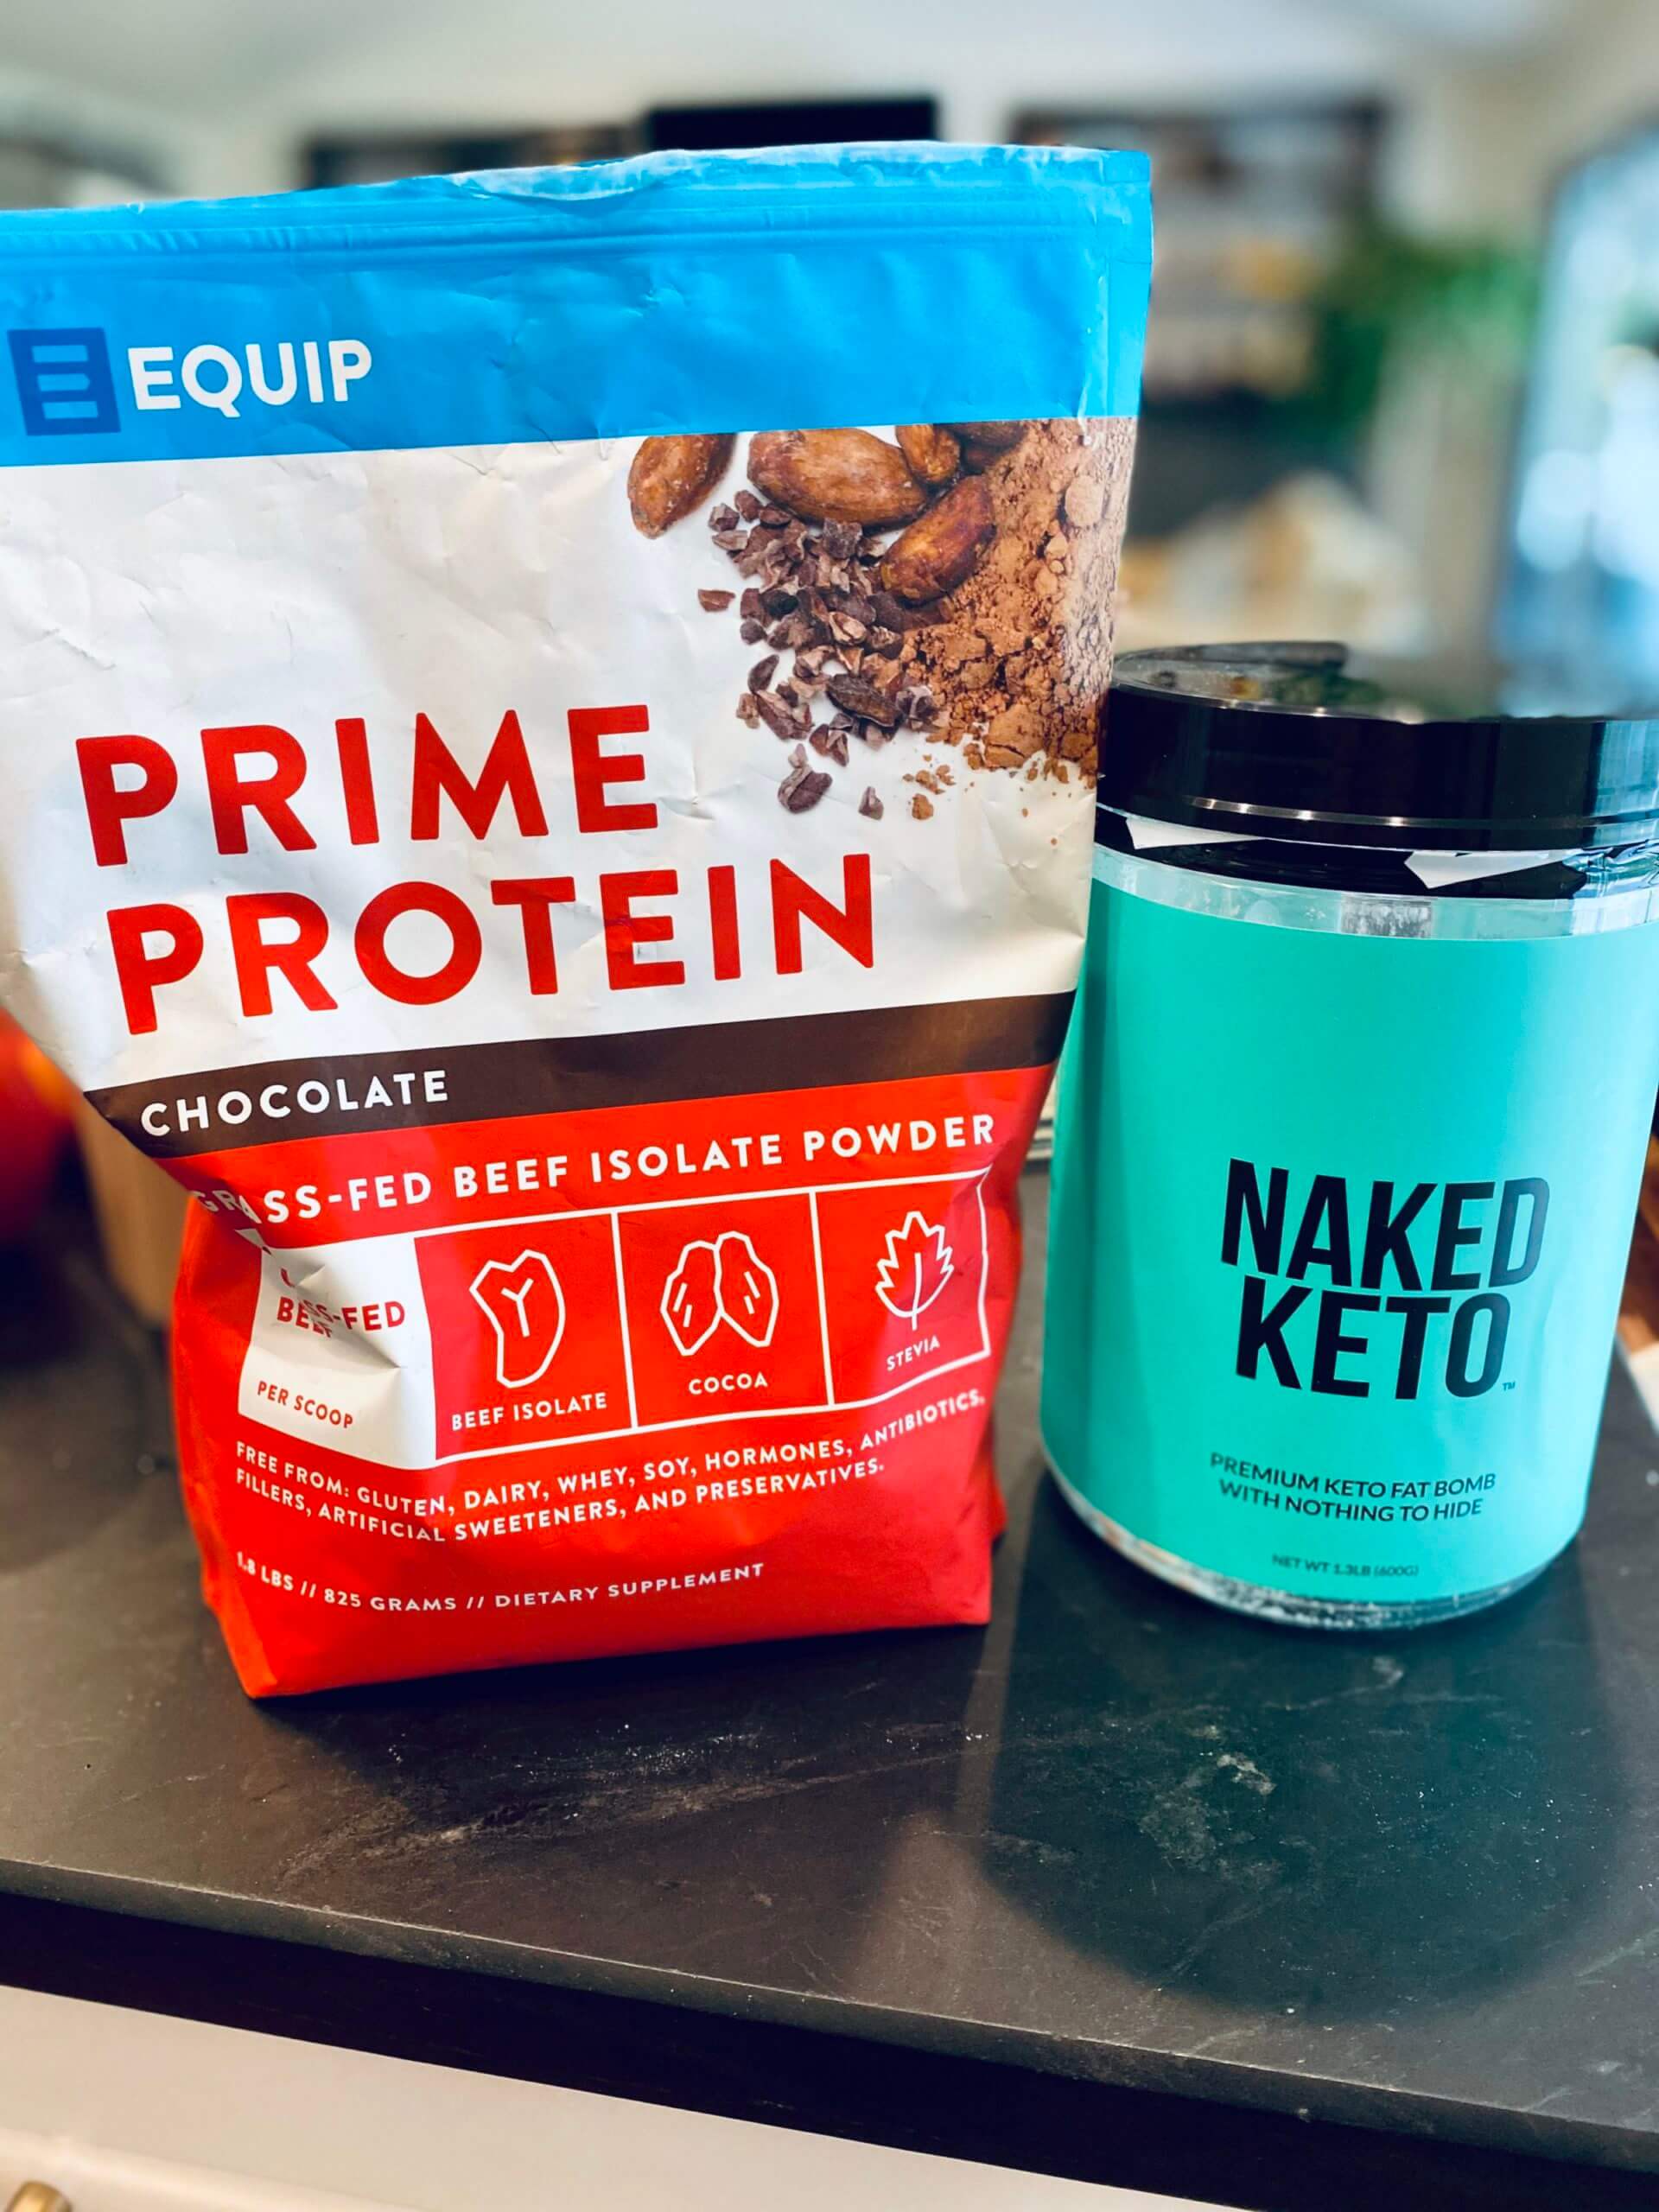 Equip Prime Protein with Naked Keto